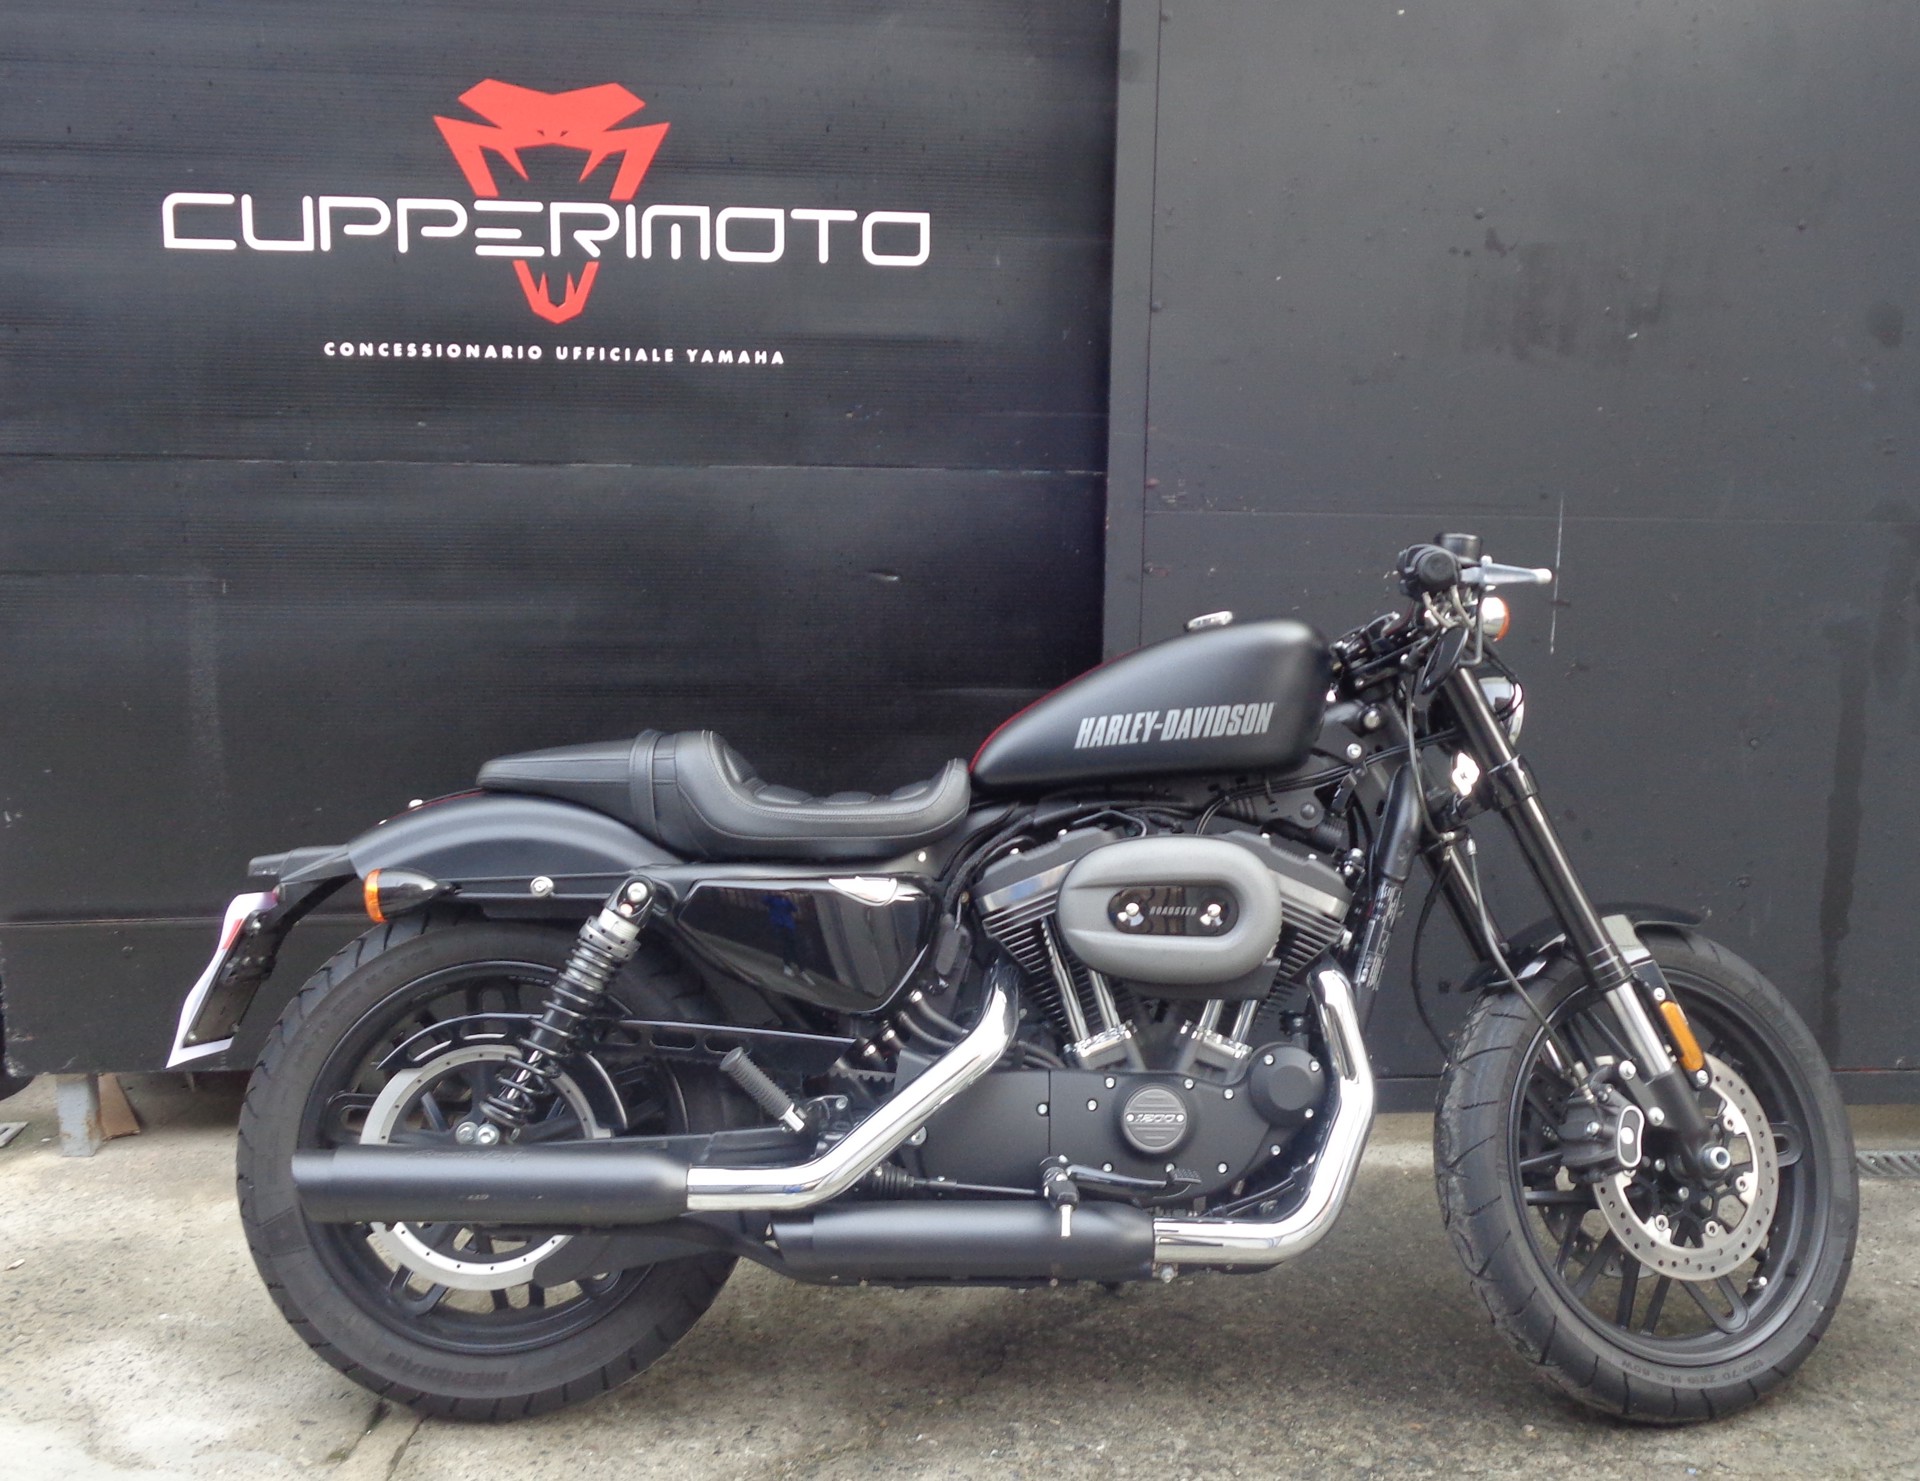 Harley-Davidson Sportster 1200 Roadster ABS usata disponibile a TO